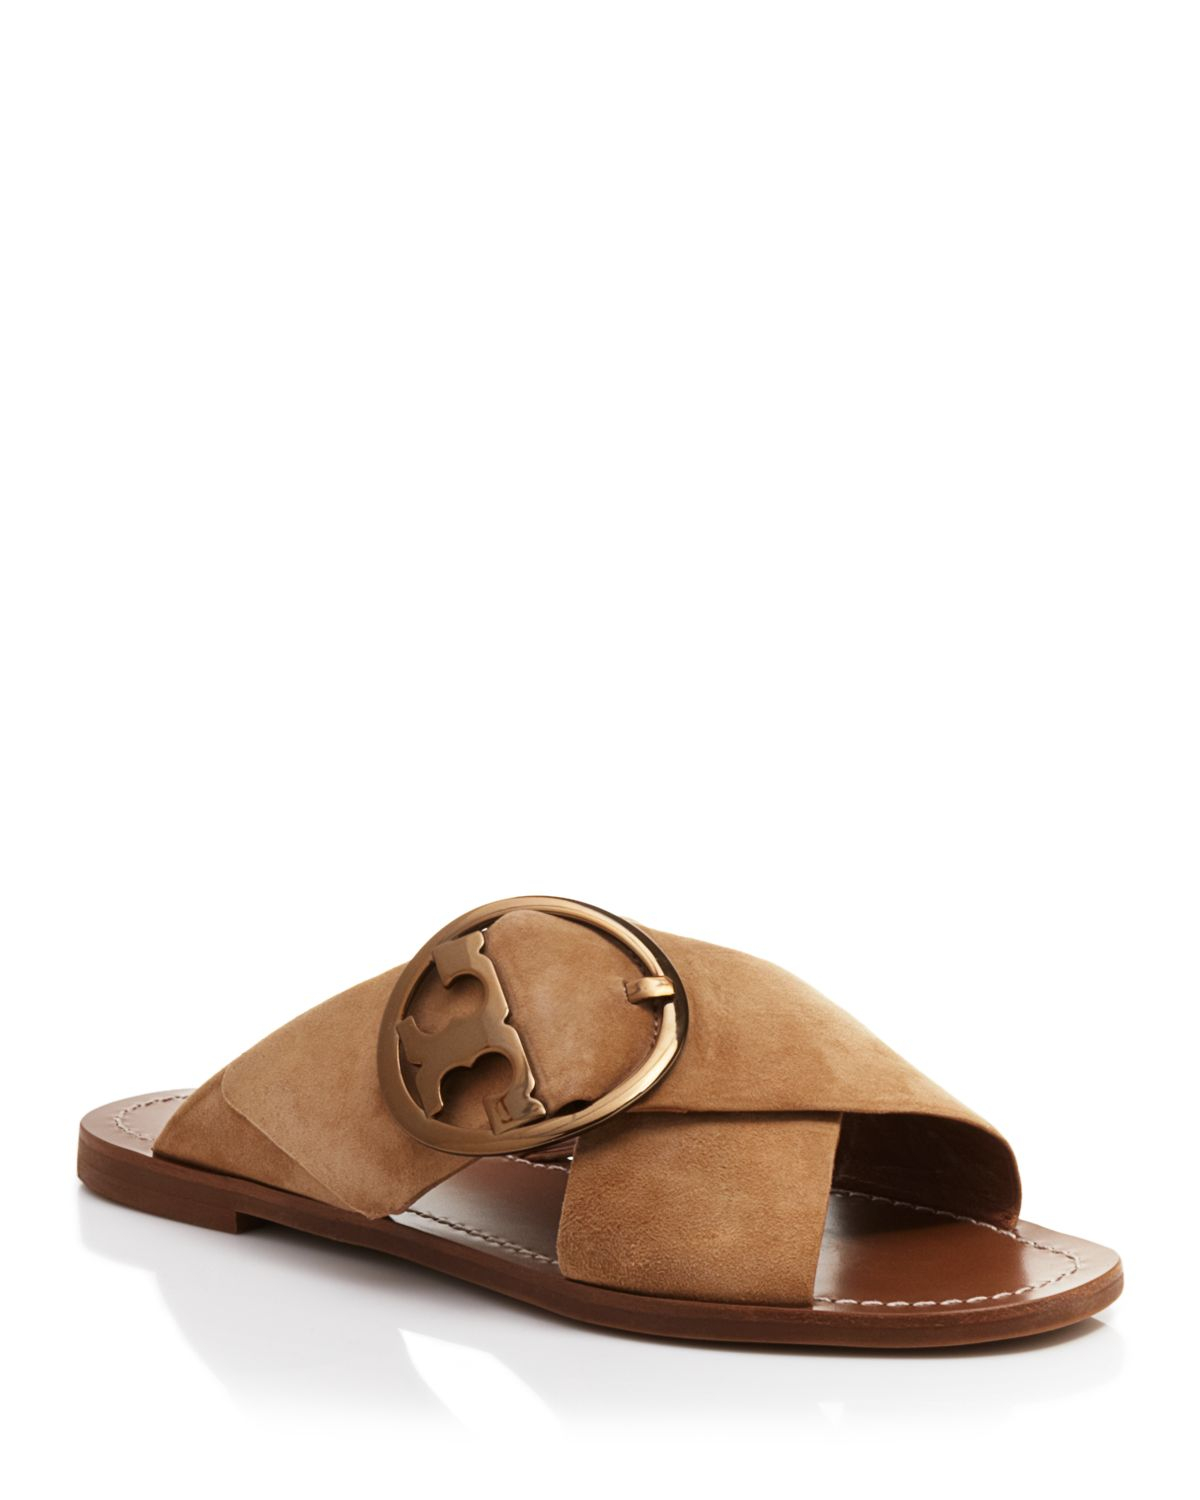 Tory Burch Flat Slide Sandals - Thames Criss Cross in Brown (French ...